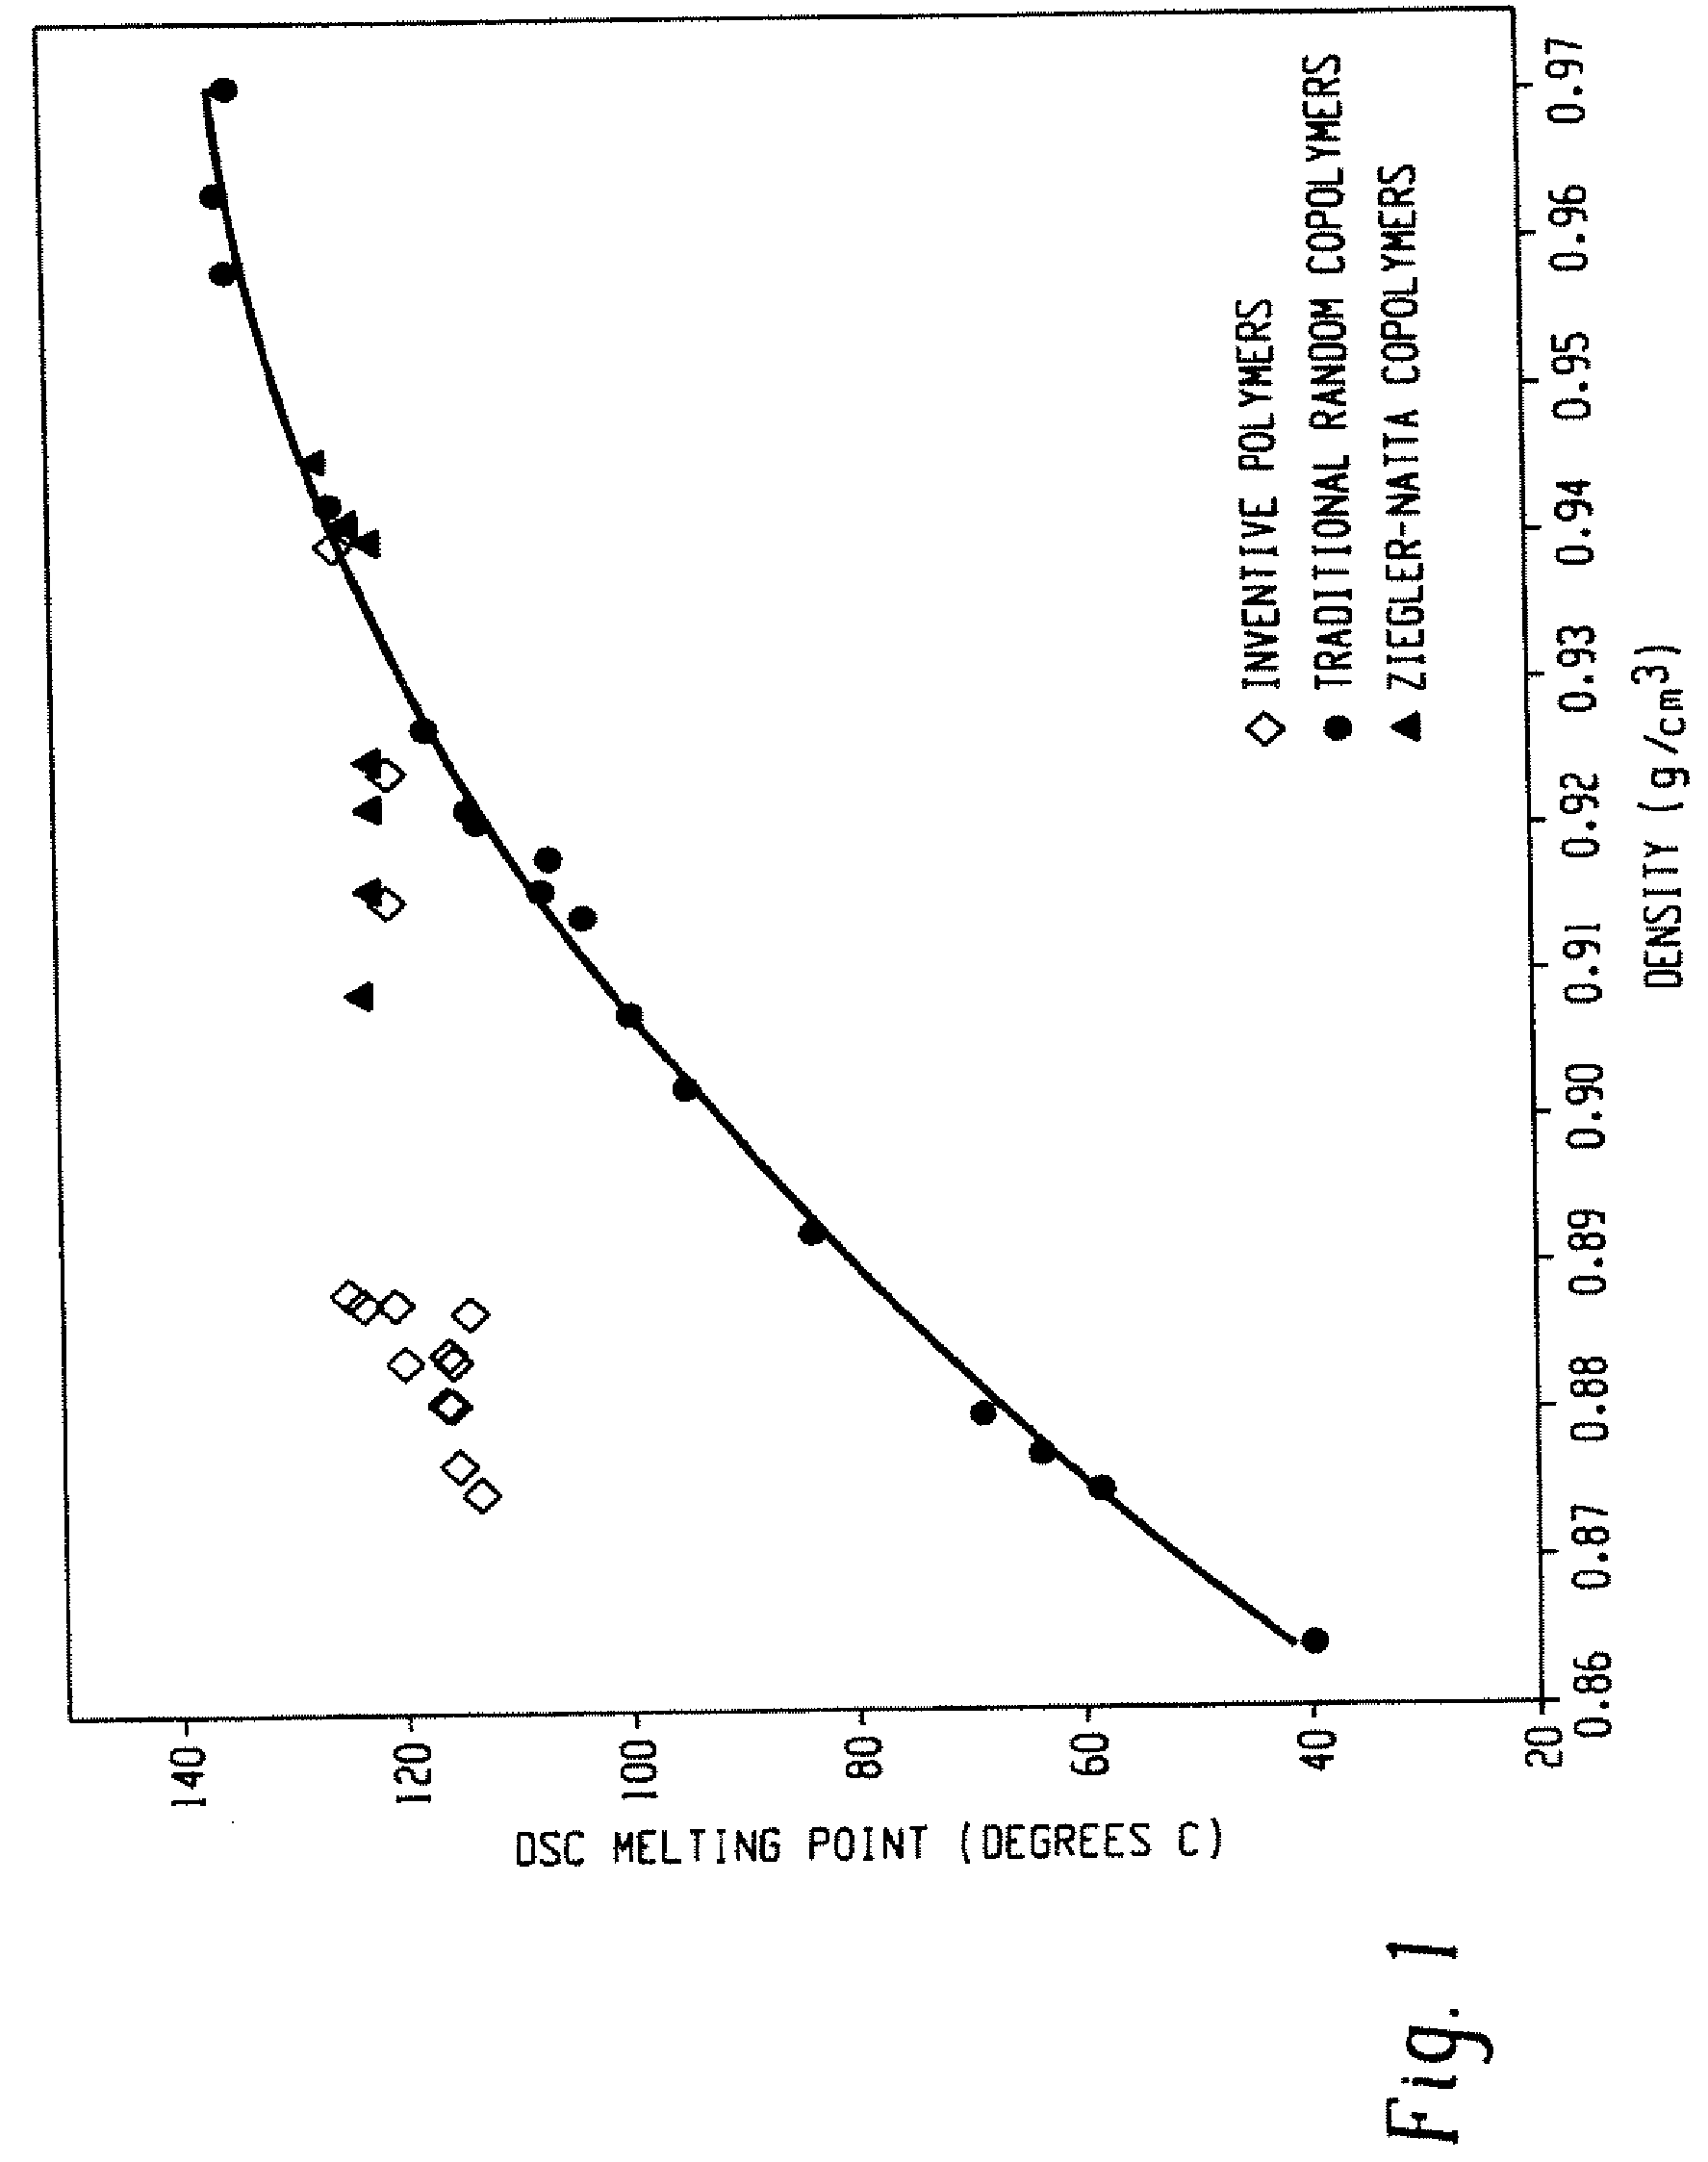 Thermoplastic olefin composition with improved heat distortion temperature